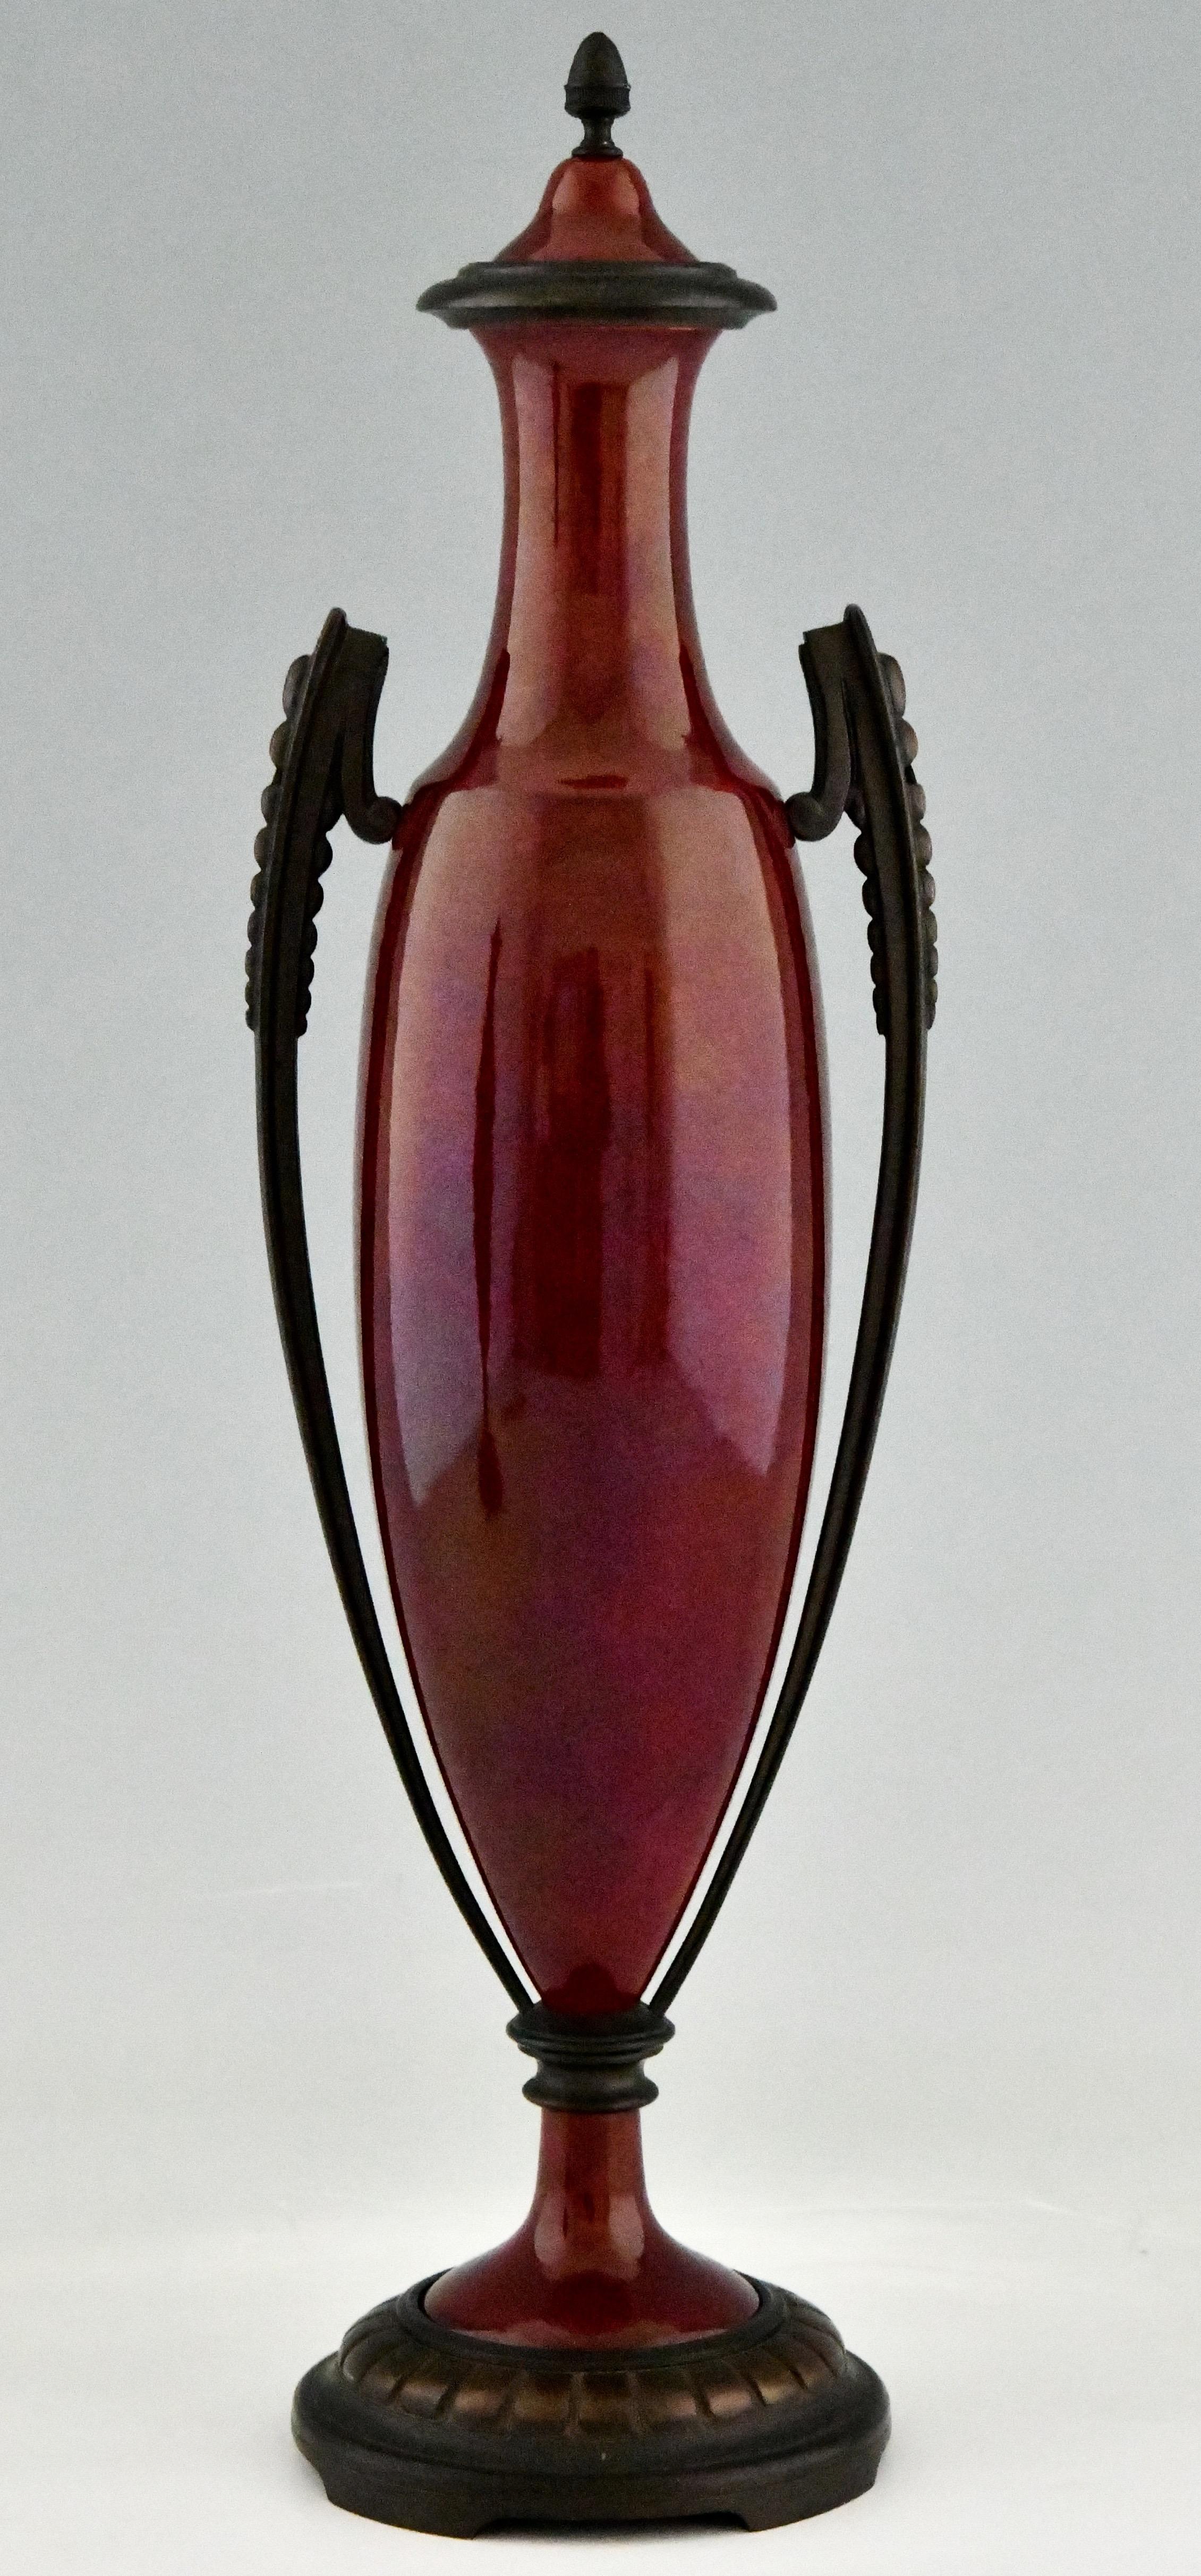 Early 20th Century Art Deco Vases Red Ceramic and Bronze Paul Milet for Sèvres, 1920 For Sale